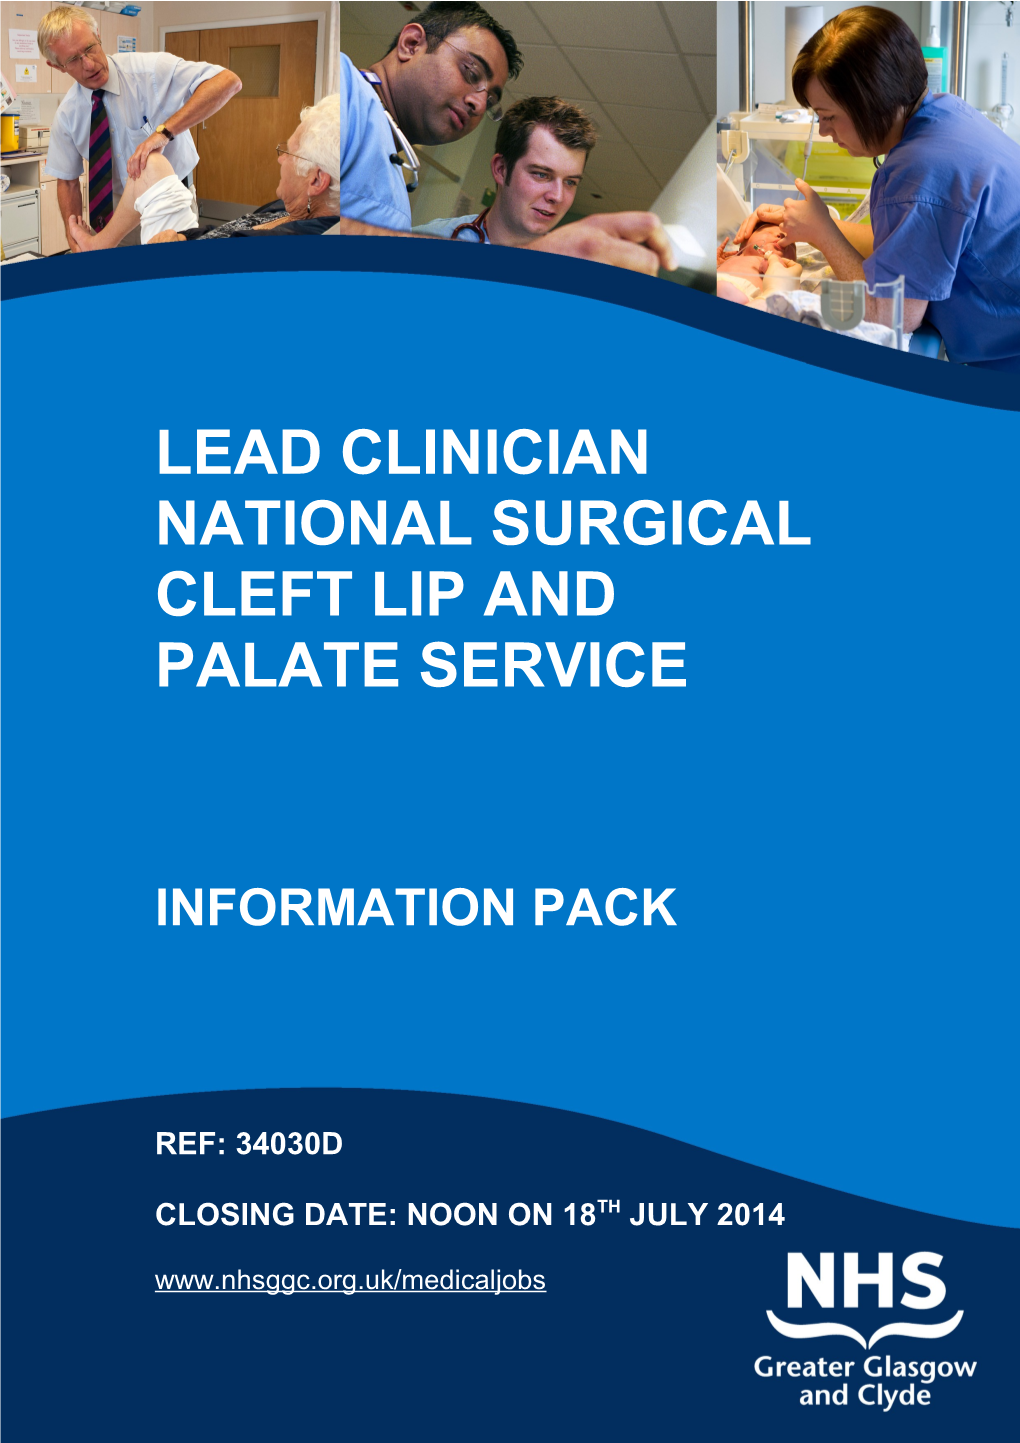 National SURGICAL Cleft Lip and Palate Service